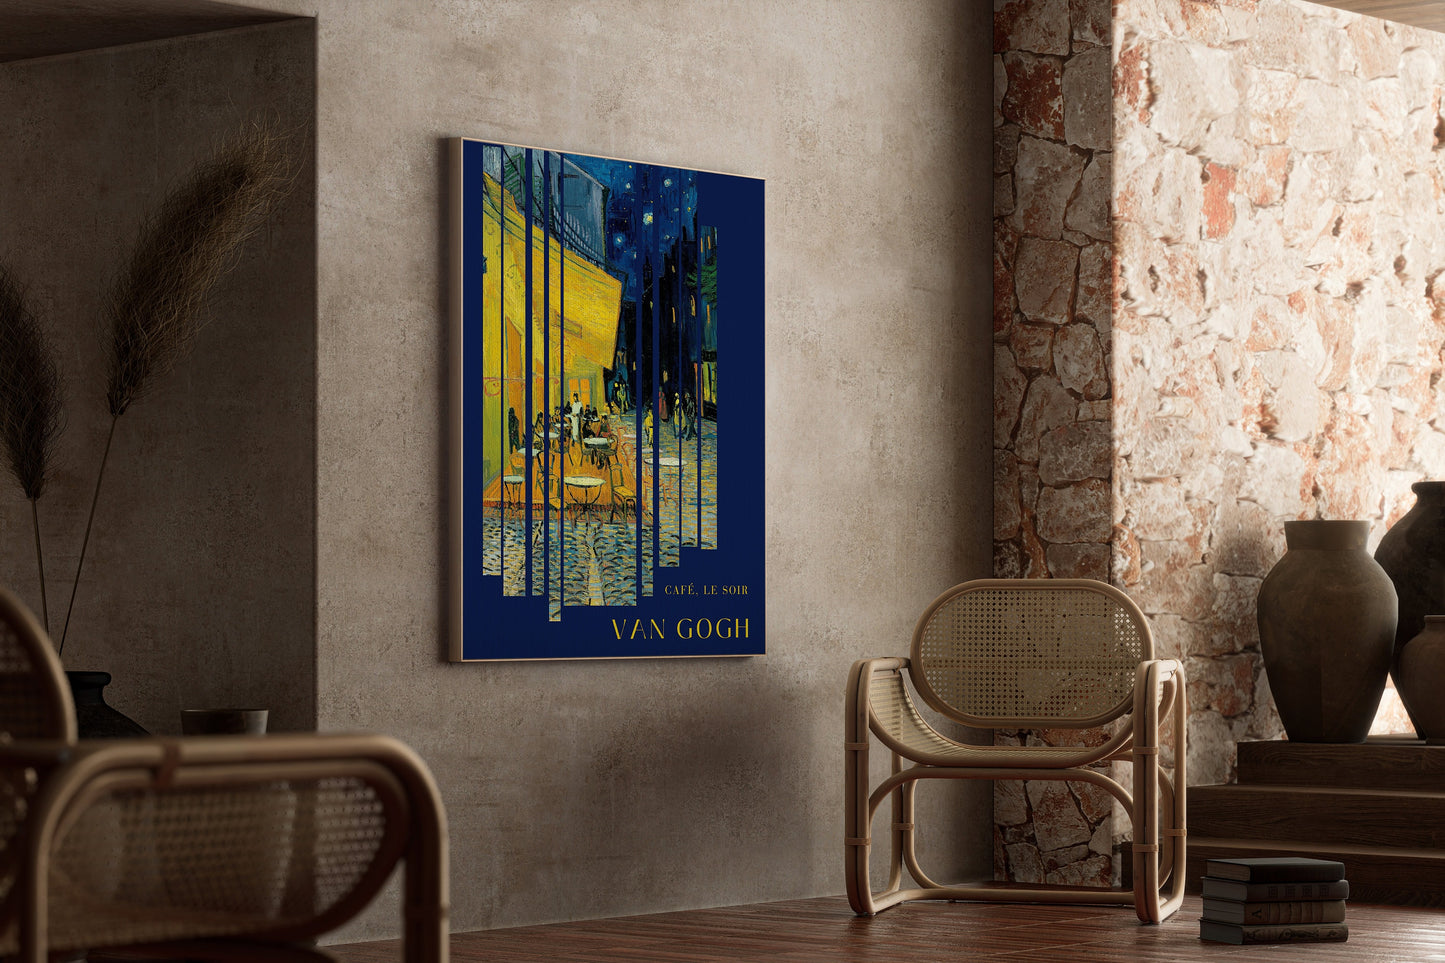 Van Gogh Cafe Terrace at Night Exhibition Museum Poster Fine Art Painting Vintage Famous Ready to hang Framed Home Office Decor Gift Idea